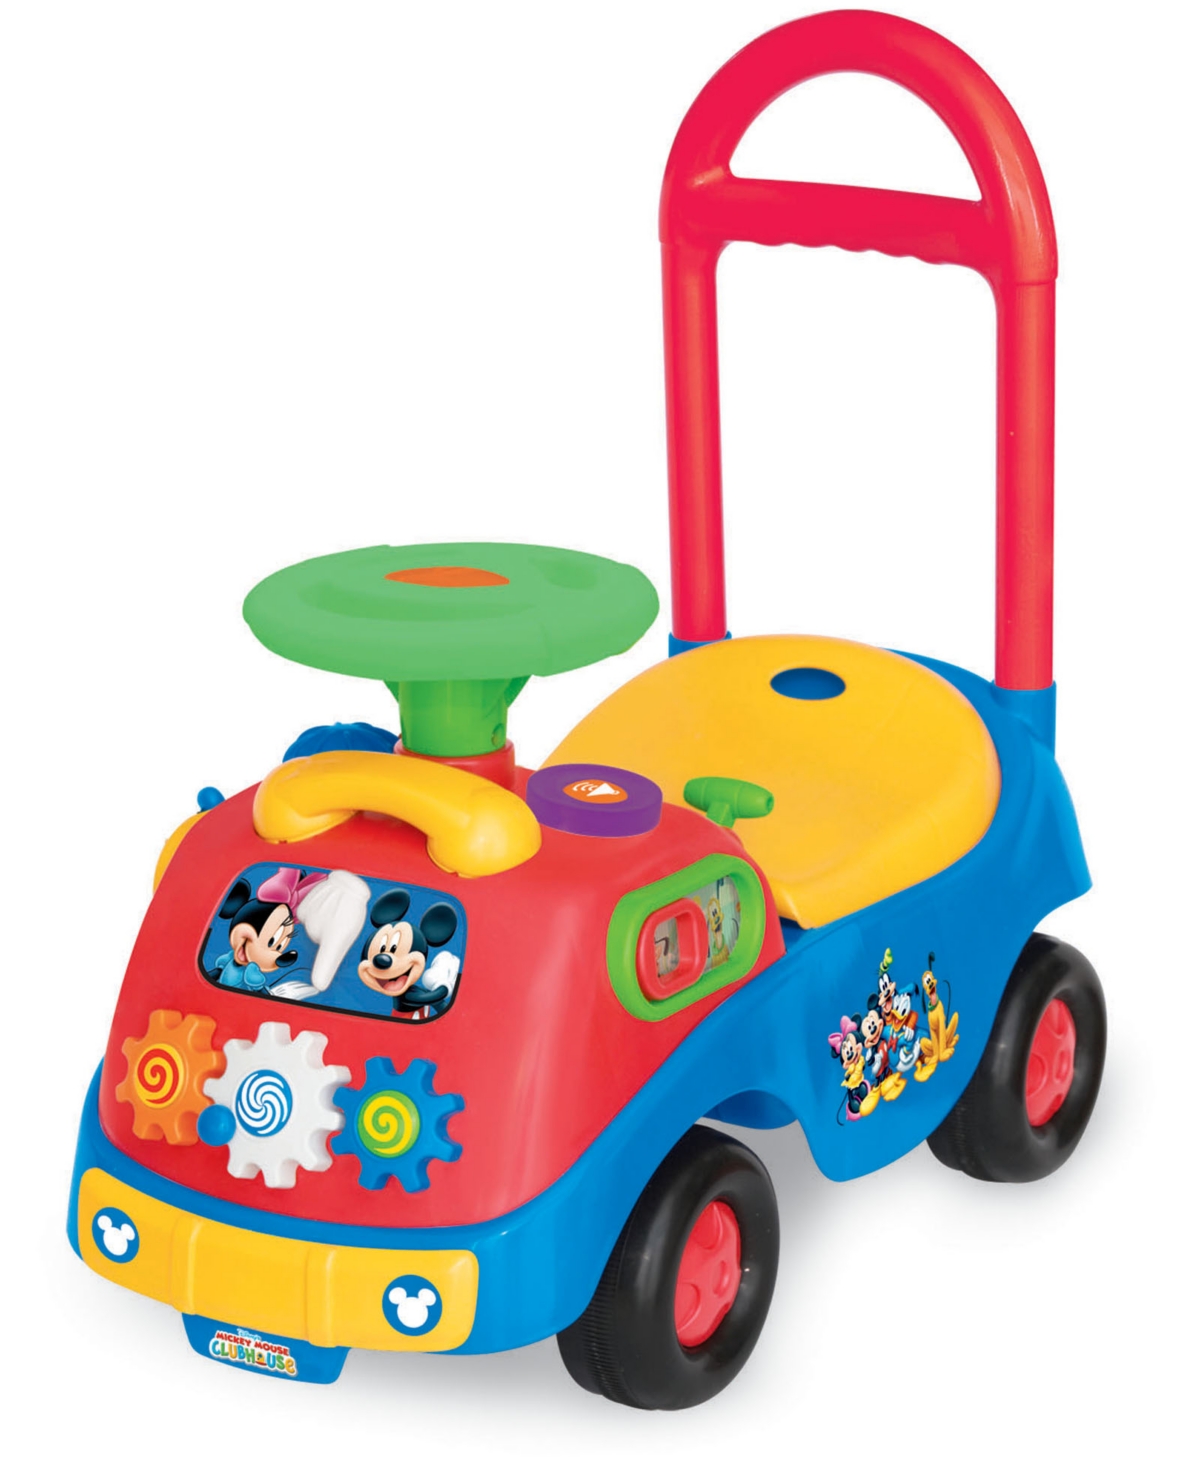 Kiddieland Disney Mickey And Friends Activity Gears Ride On Mickey Mouse In Multi